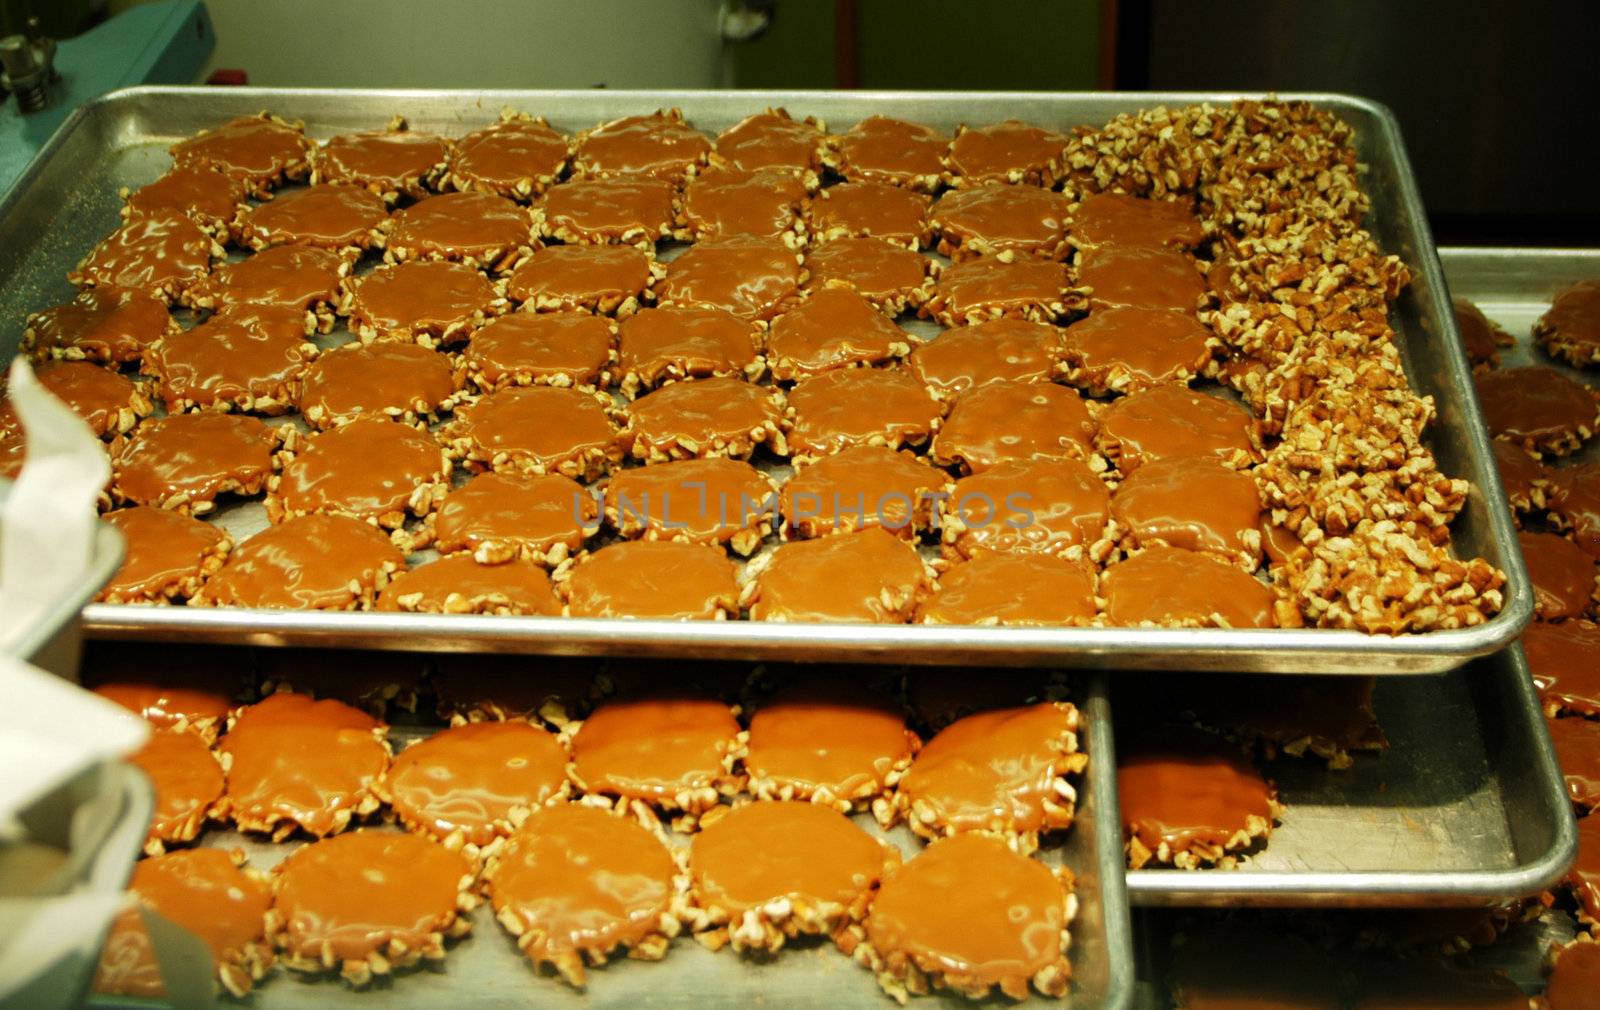 pralines on a baking sheet ready to be packaged